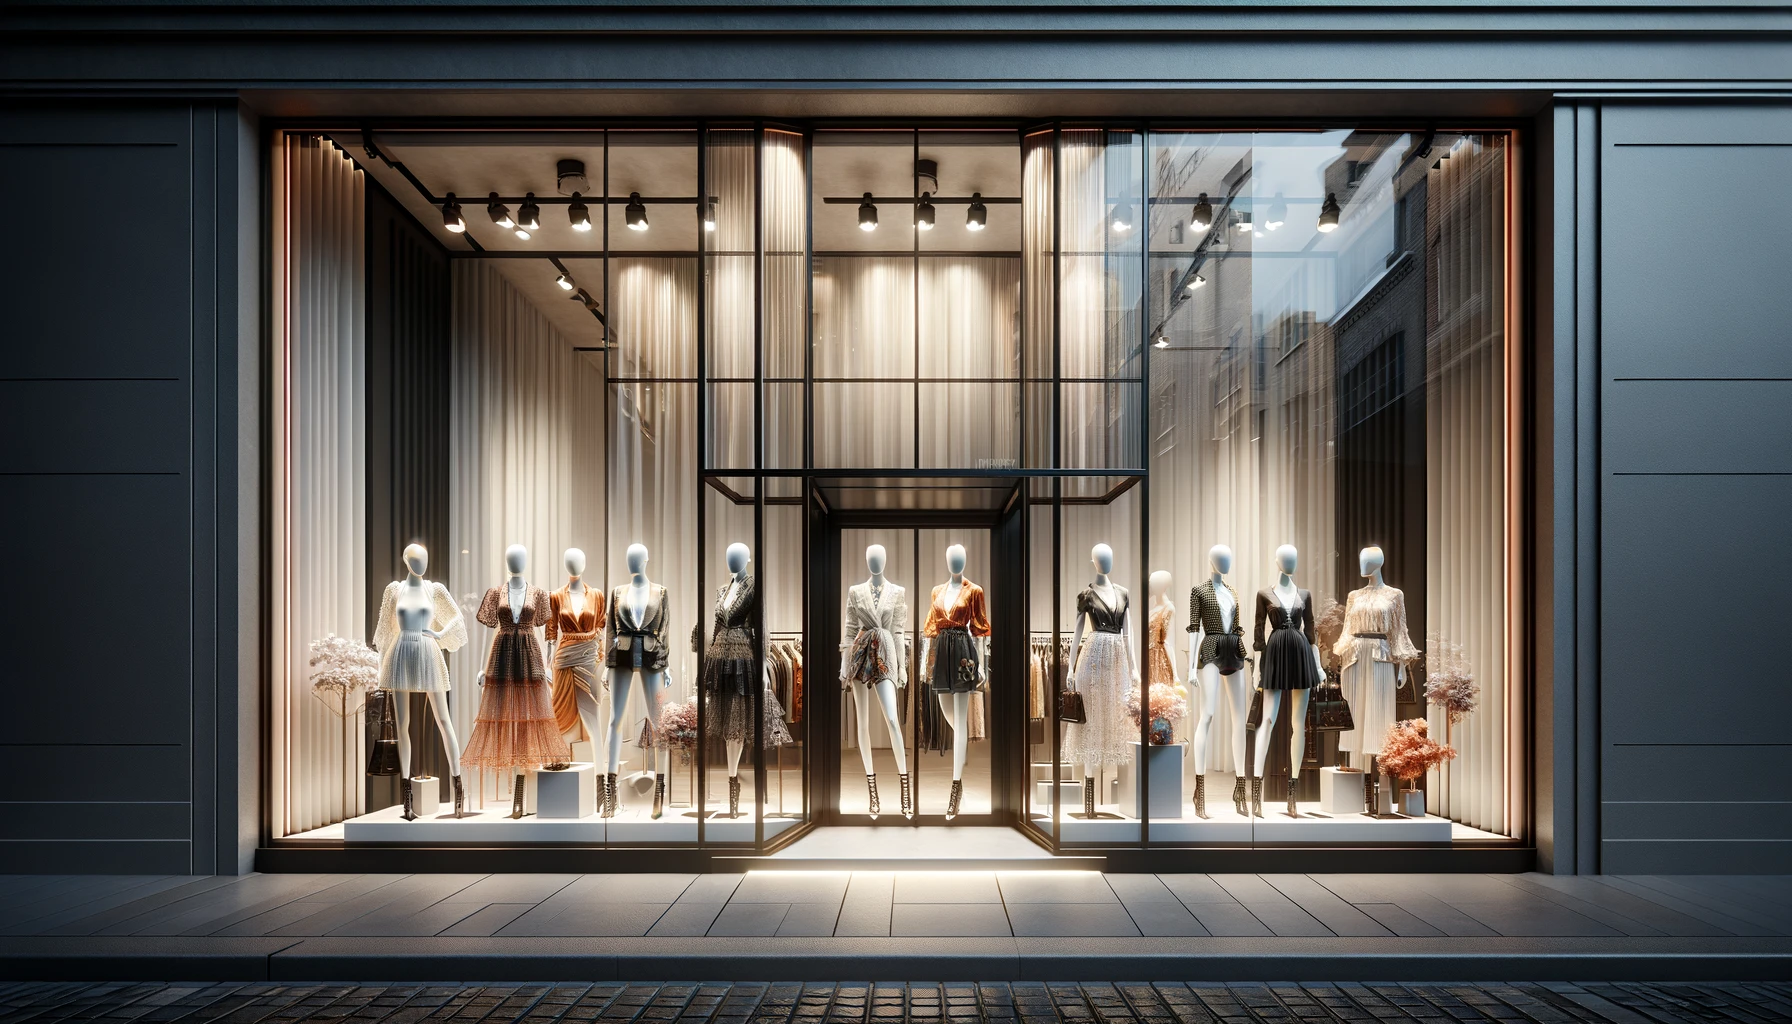 A chic, modern storefront with captivating window displays, featuring mannequins in dynamic poses and trendy outfits, illuminated by sophisticated lighting. No signs or textual elements are present, focusing purely on visual merchandising.